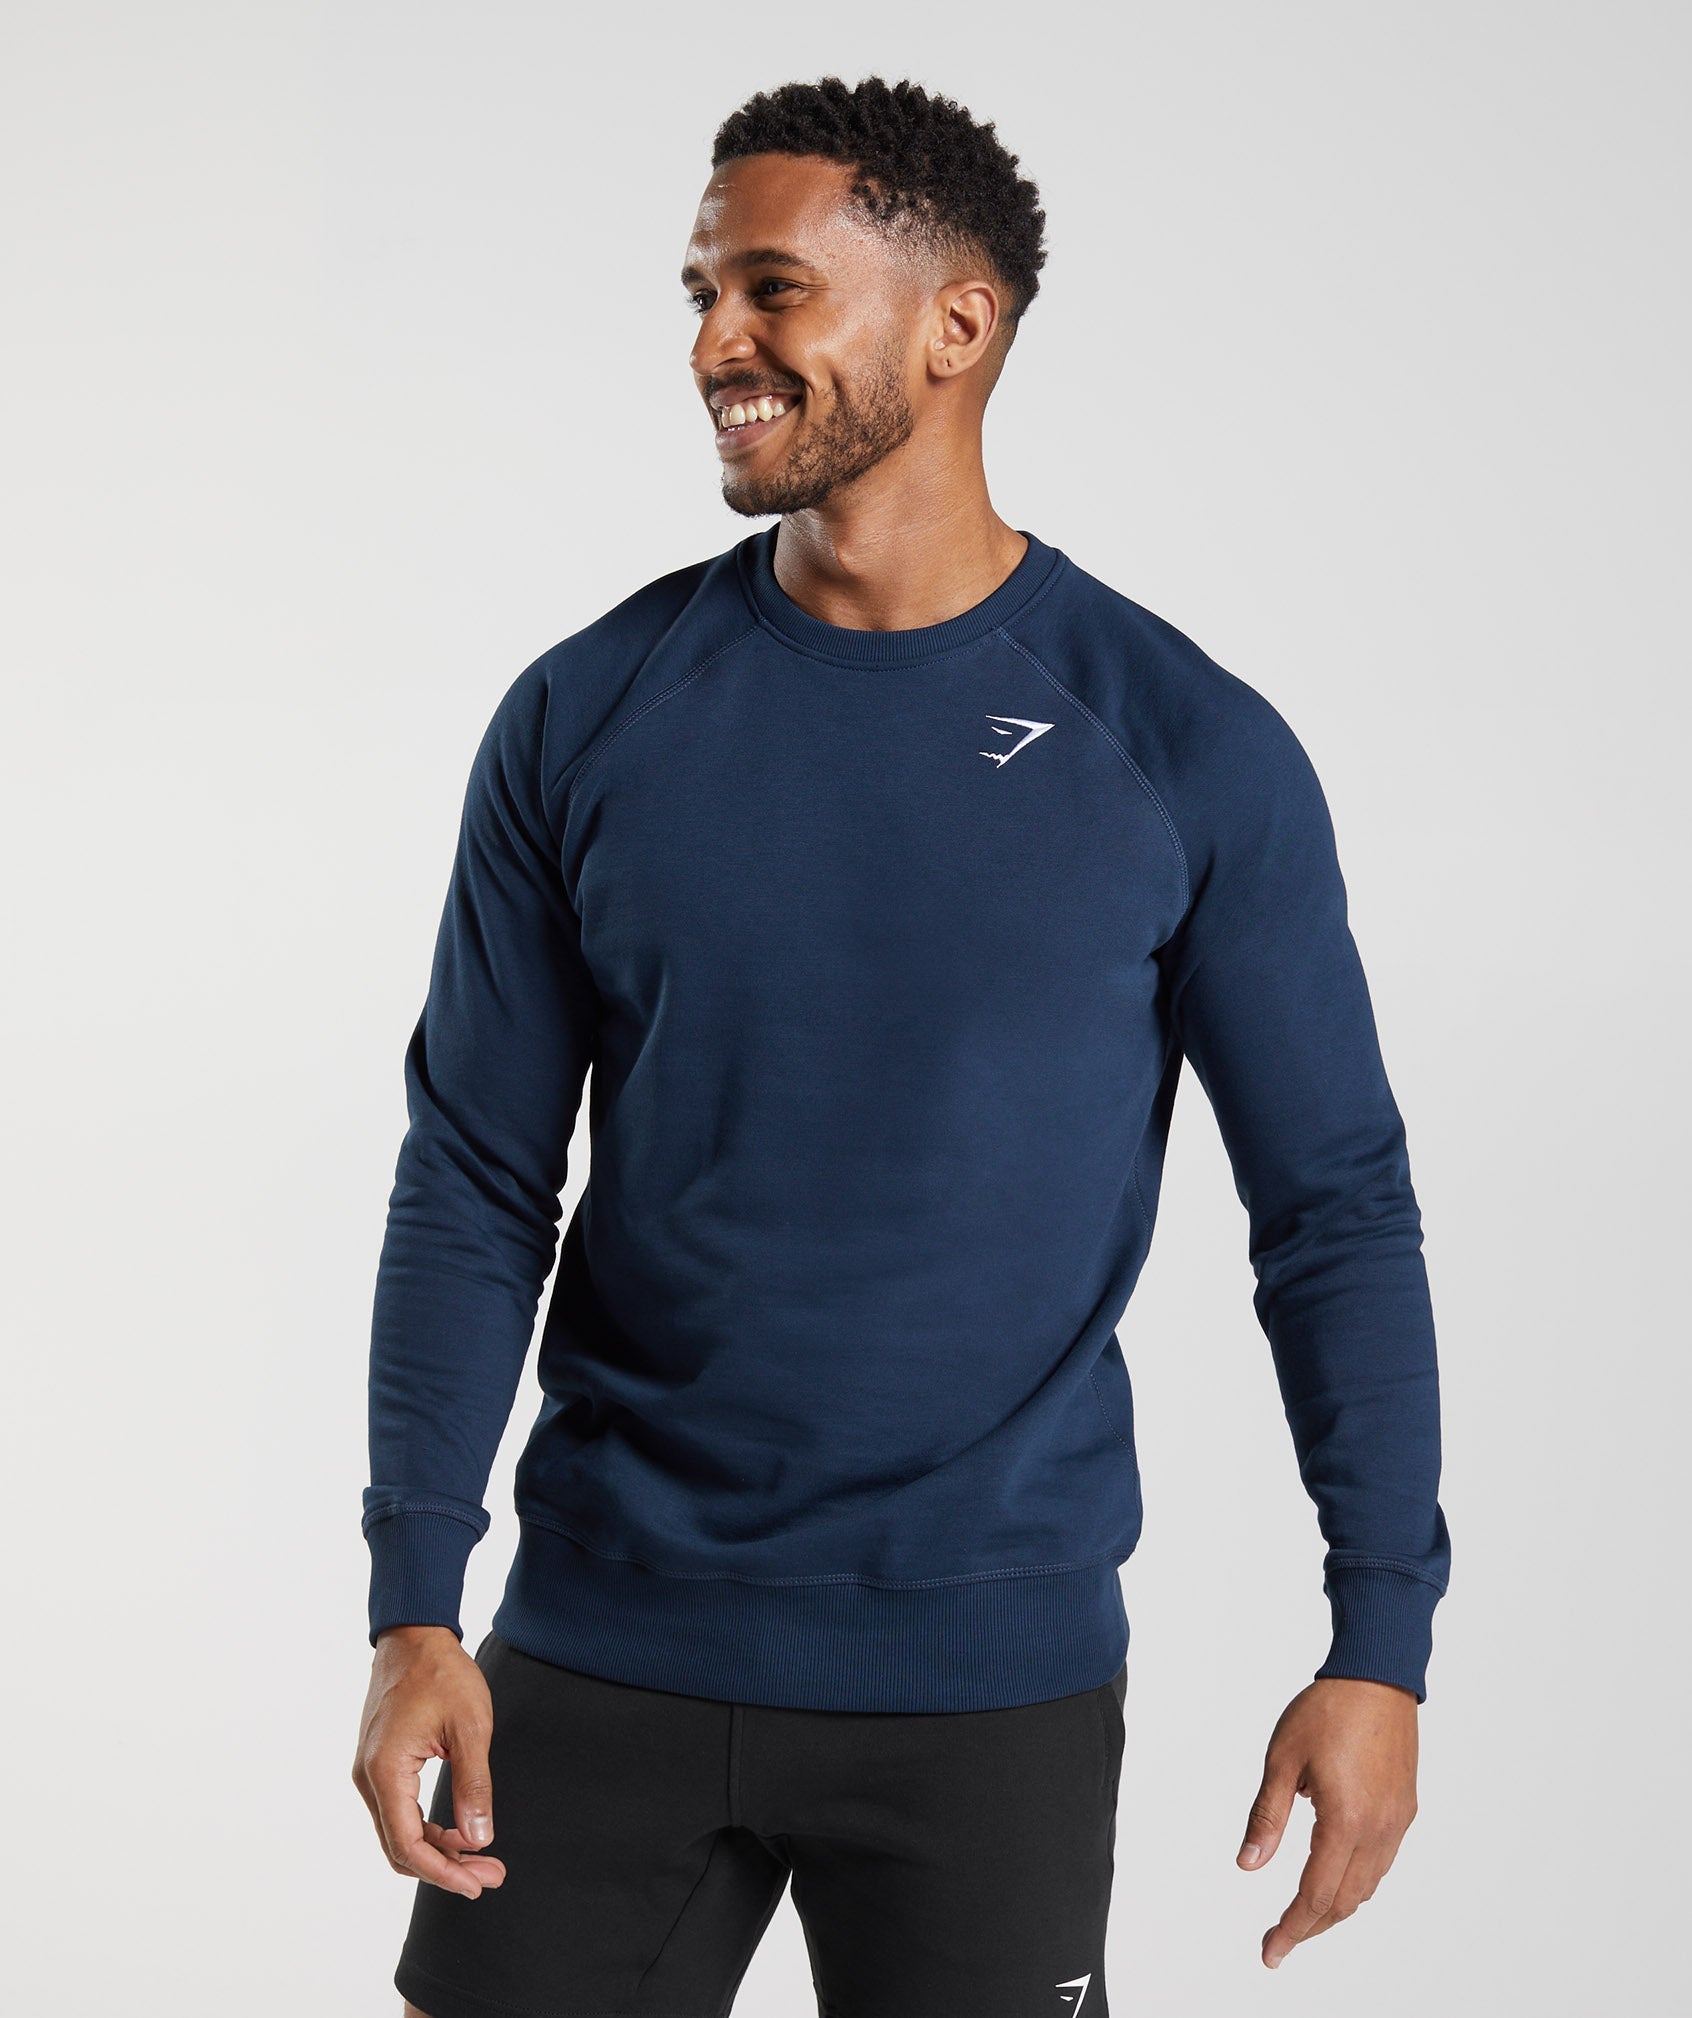 Crest Sweatshirt in Navy is out of stock